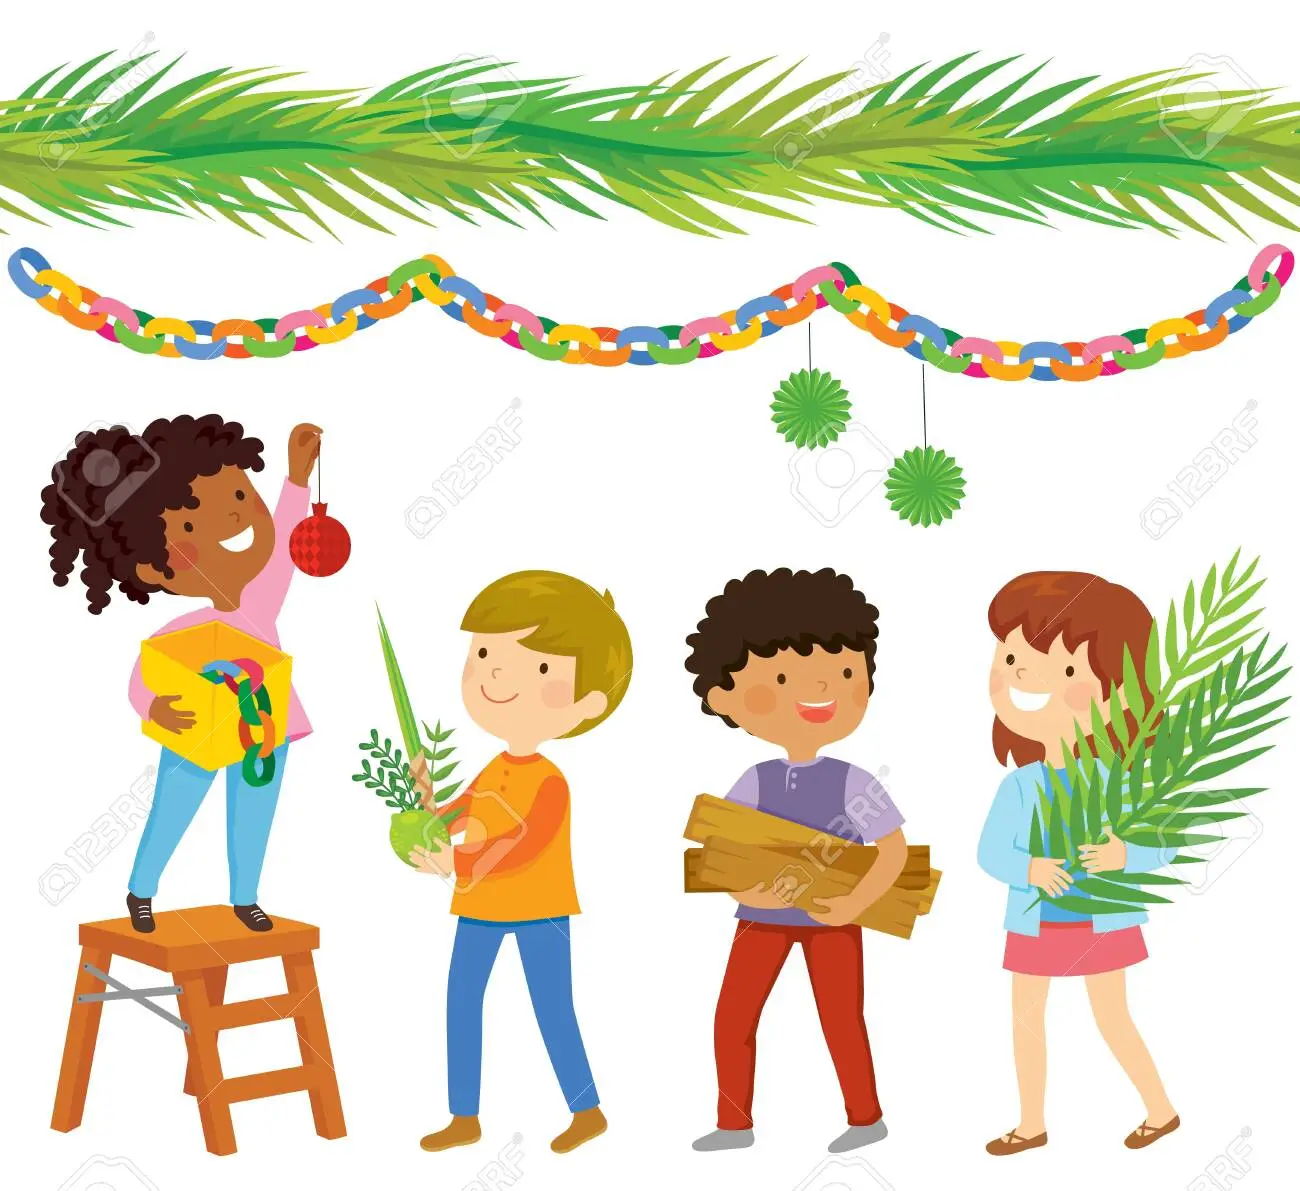 Build and Decorate a Sukkah in Fair Lawn and Paramus!